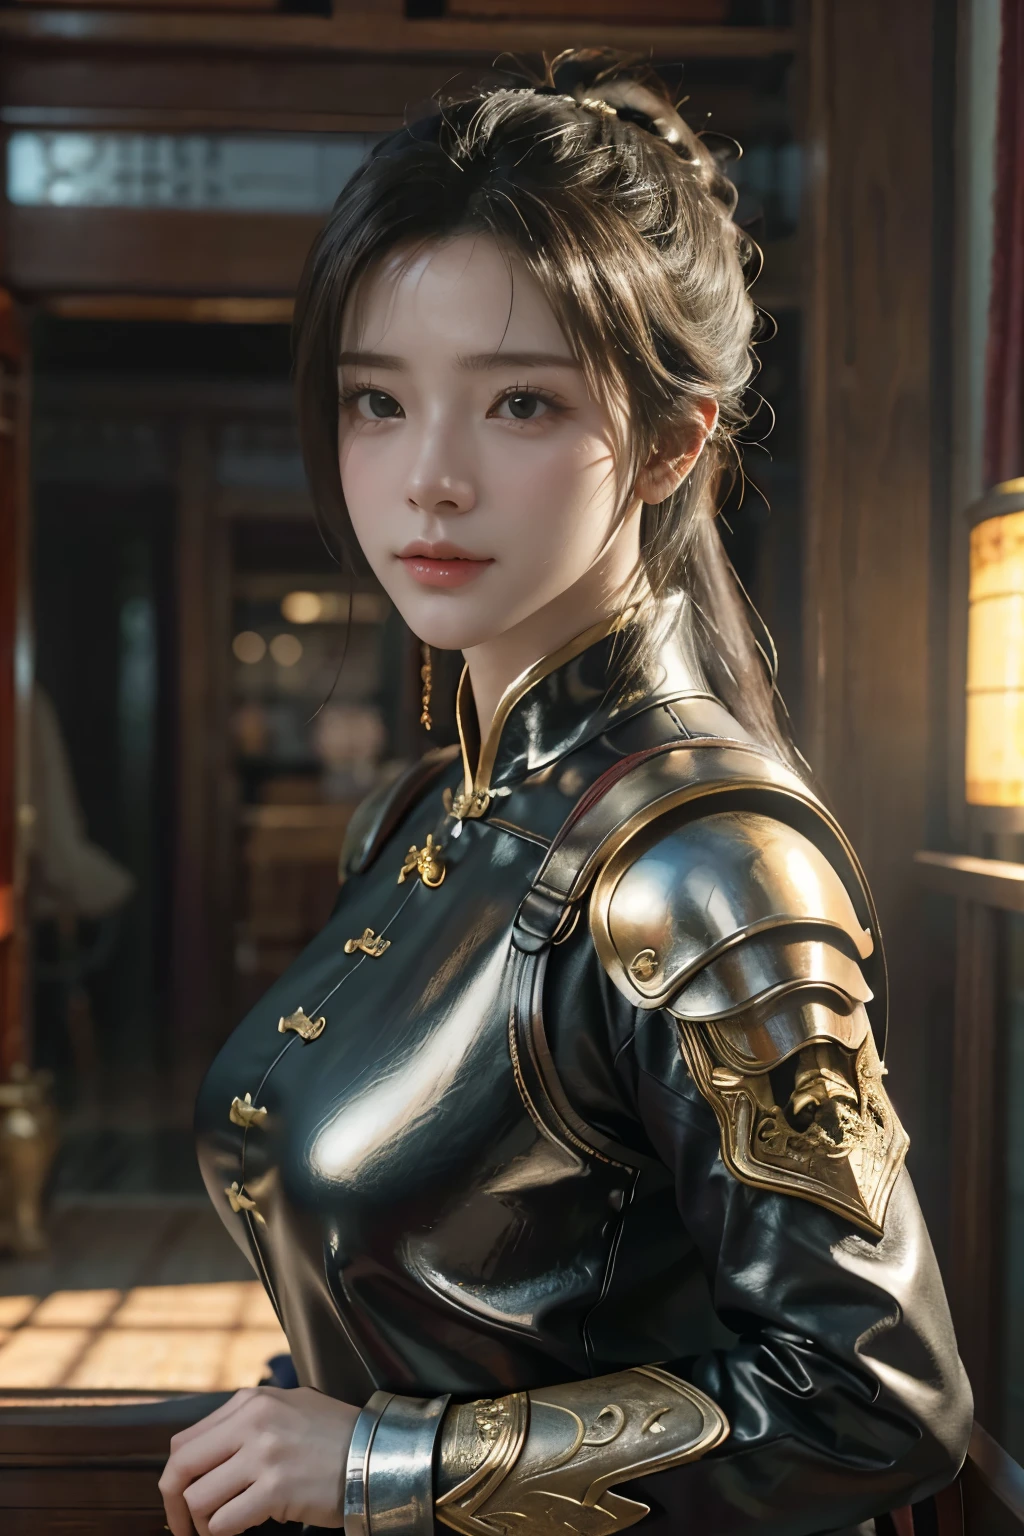 Game art，The best picture quality，Highest resolution，8k，(A bust photograph)，(Portrait)，(Head close-up)，(Rule of thirds)，Unreal Engine 5 rendering works， (The Girl of the Future)，(Female Warrior)， 
20-year-old girl，((Hunter))，An eye rich in detail，(Big breasts)，Elegant and noble，indifferent，brave，
（Medieval-style fur combat clothing，Glowing magic lines，Animal skin clothing with rich detailedieval Lady Knight，Medieval ranger，
Photo poses，Simple background，Movie lights，Ray tracing，Game CG，((3D Unreal Engine))，oc rendering reflection pattern